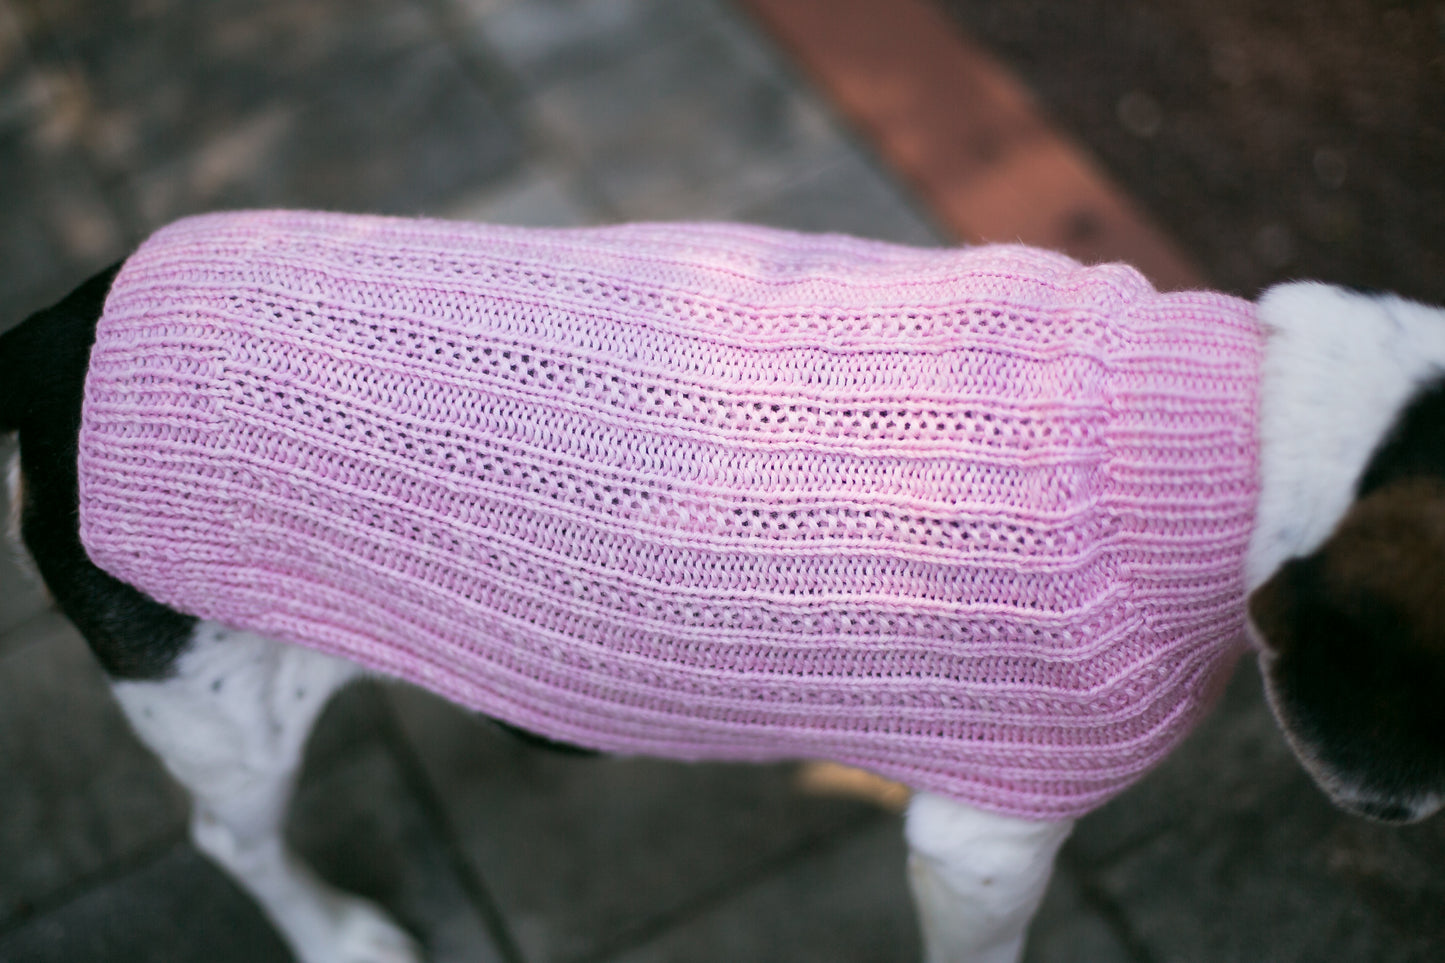 Cat & Dog Pet Sweaters in Whisper - LAST OF THIS COLORWAY!